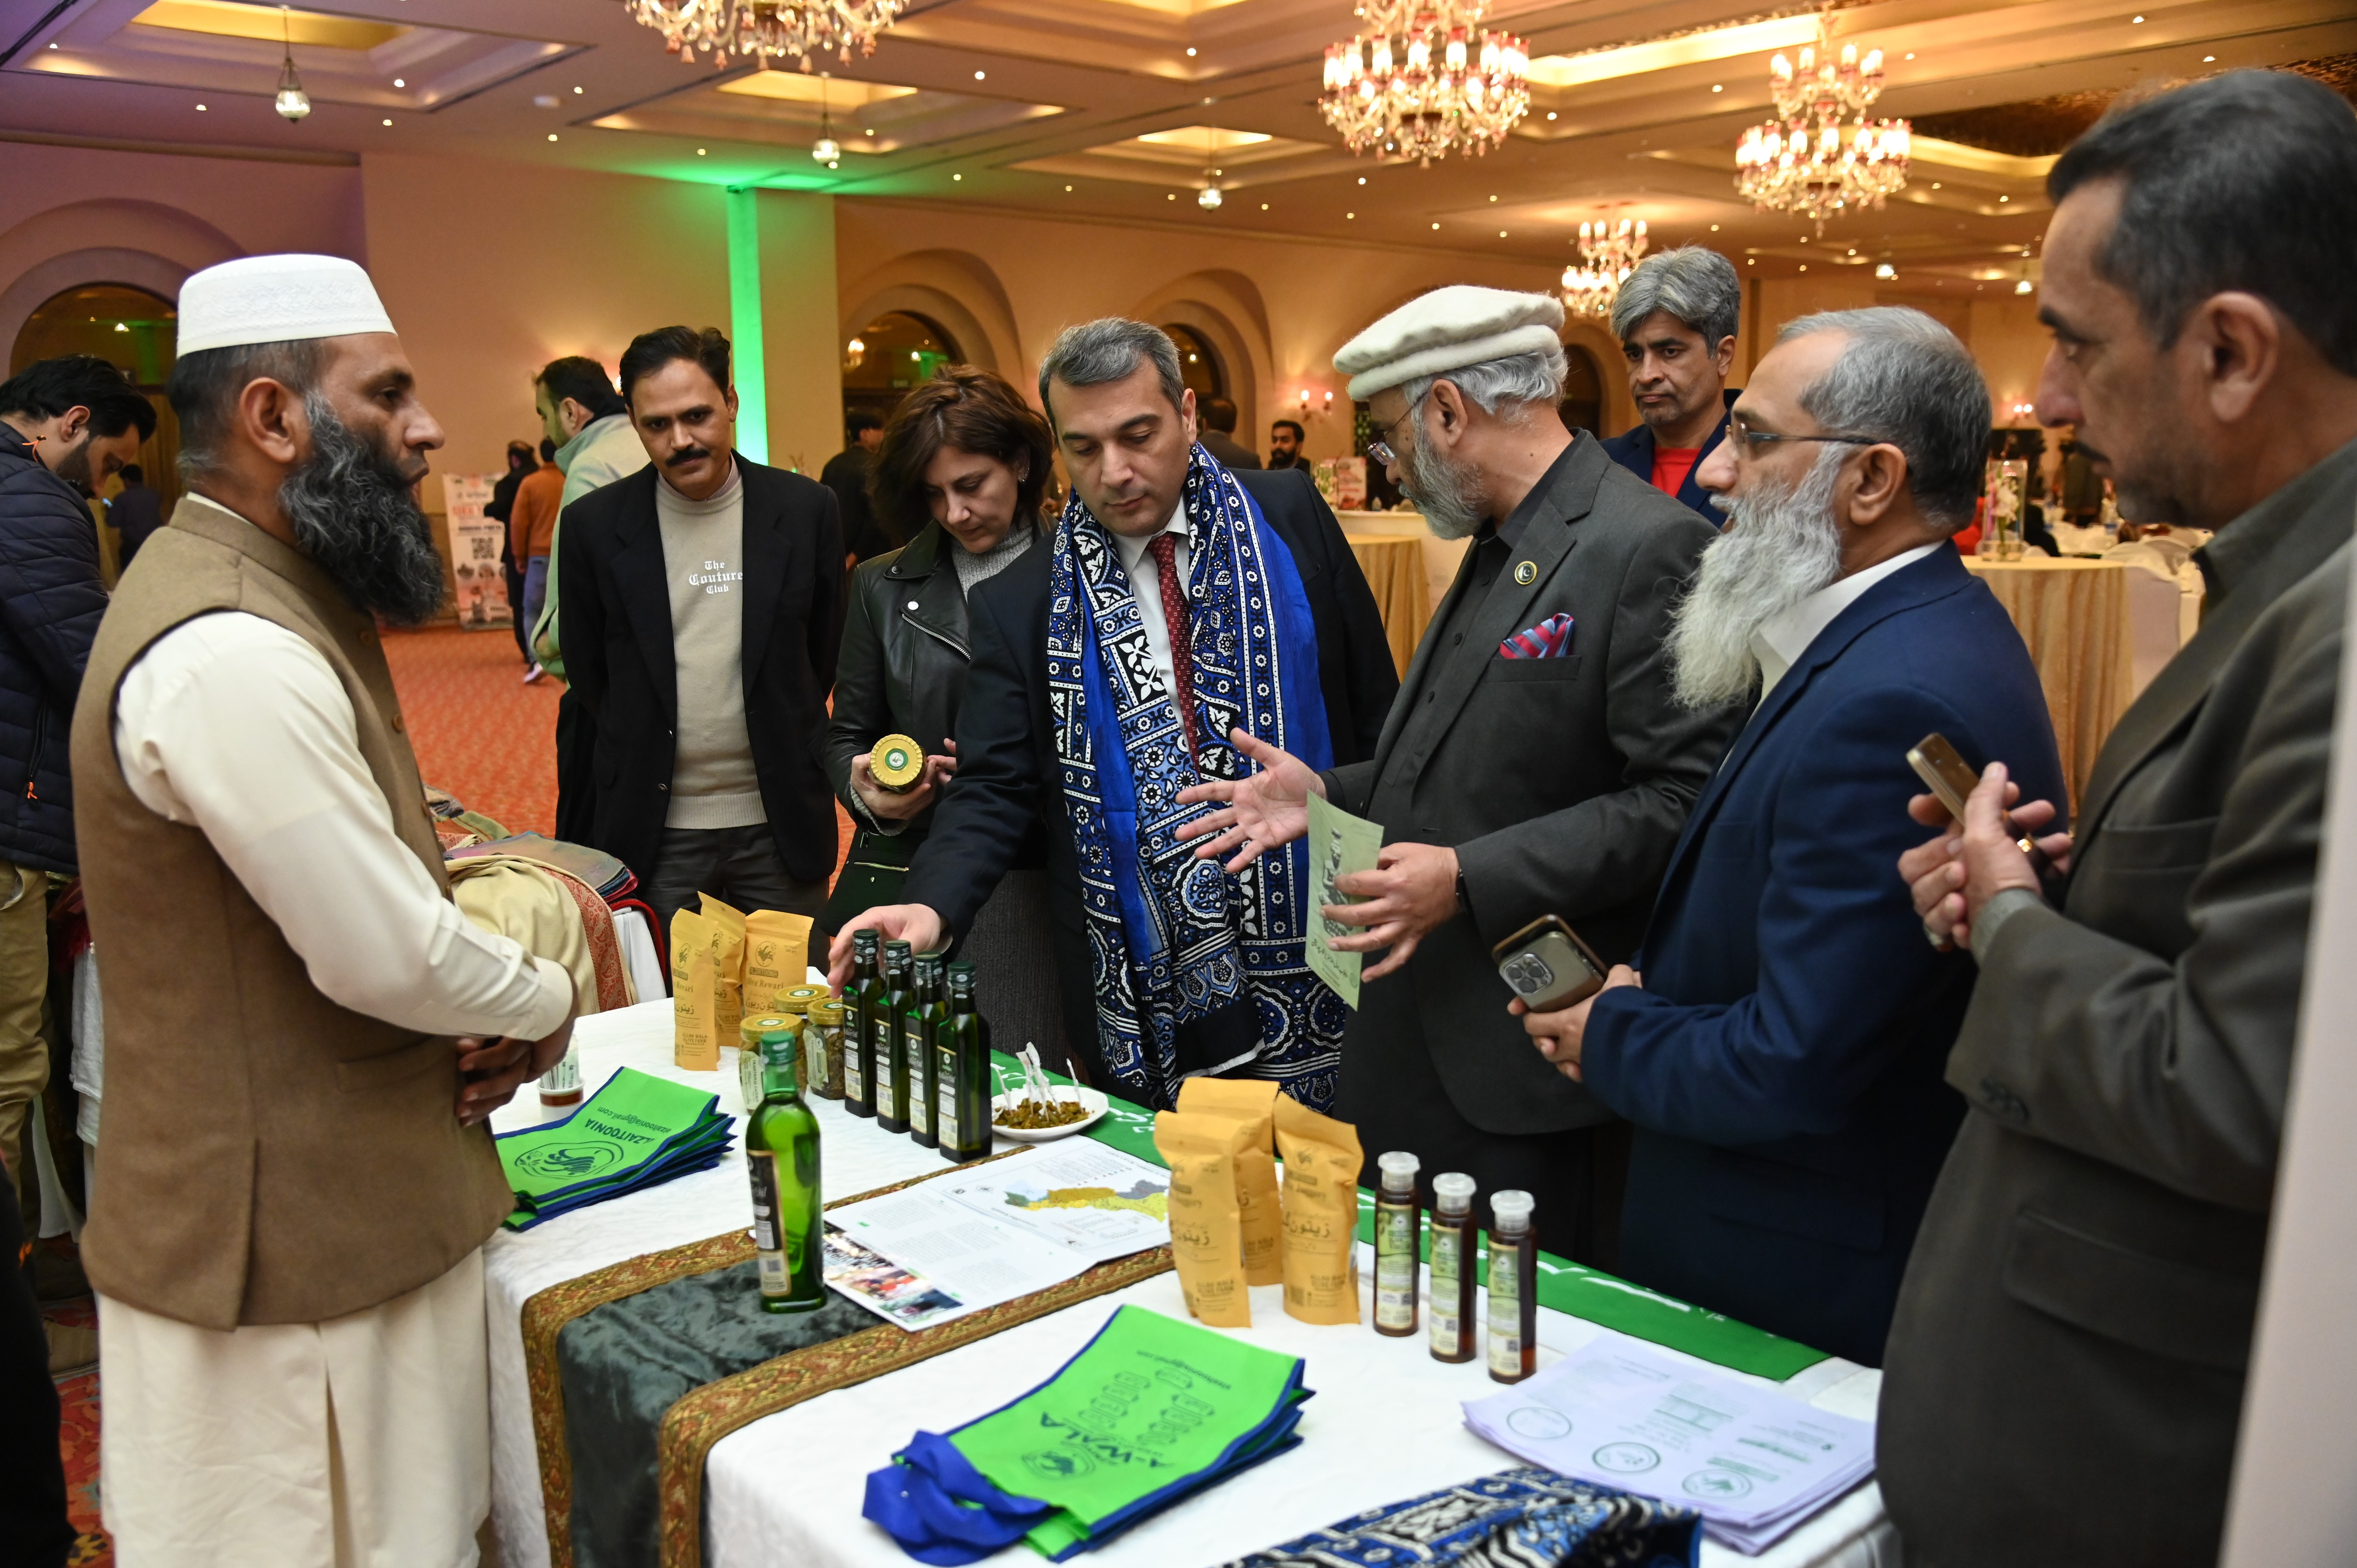 Mr Aftab ur Rehman, chairman of PTDC visiting various stalls with the chief guests